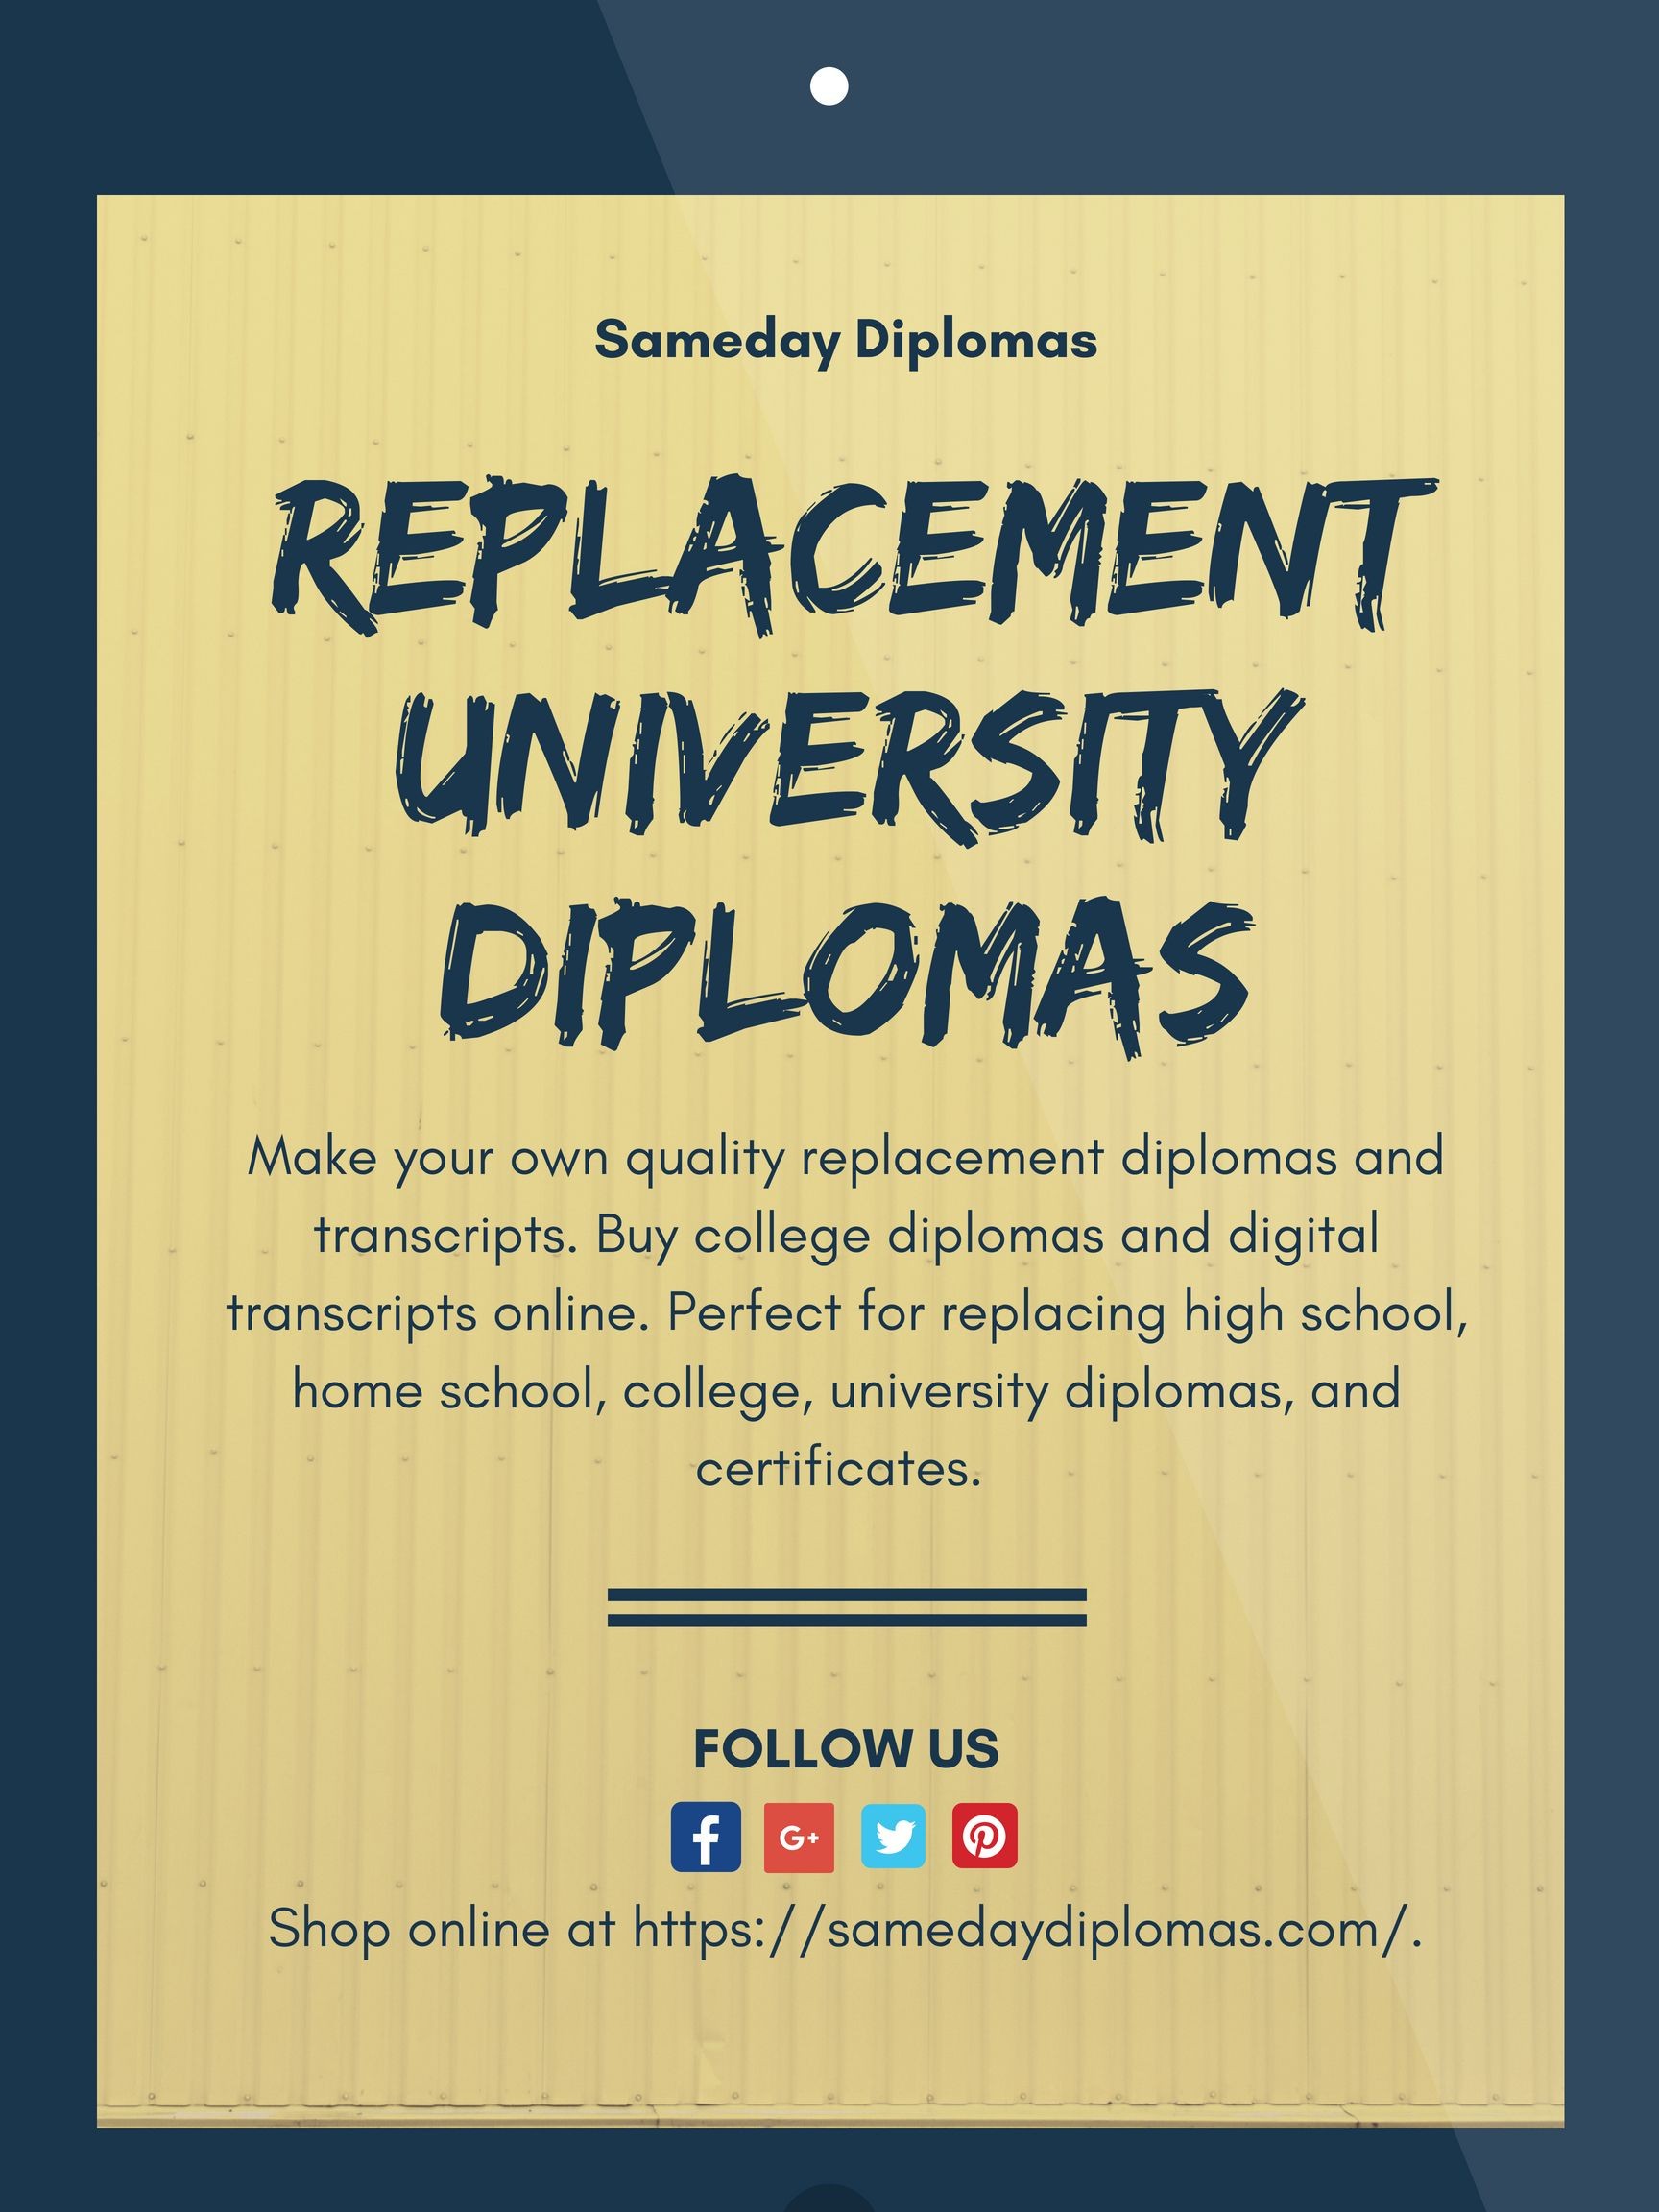 Lost Or Damaged Your Certificate Get Replacement Of University Make Own